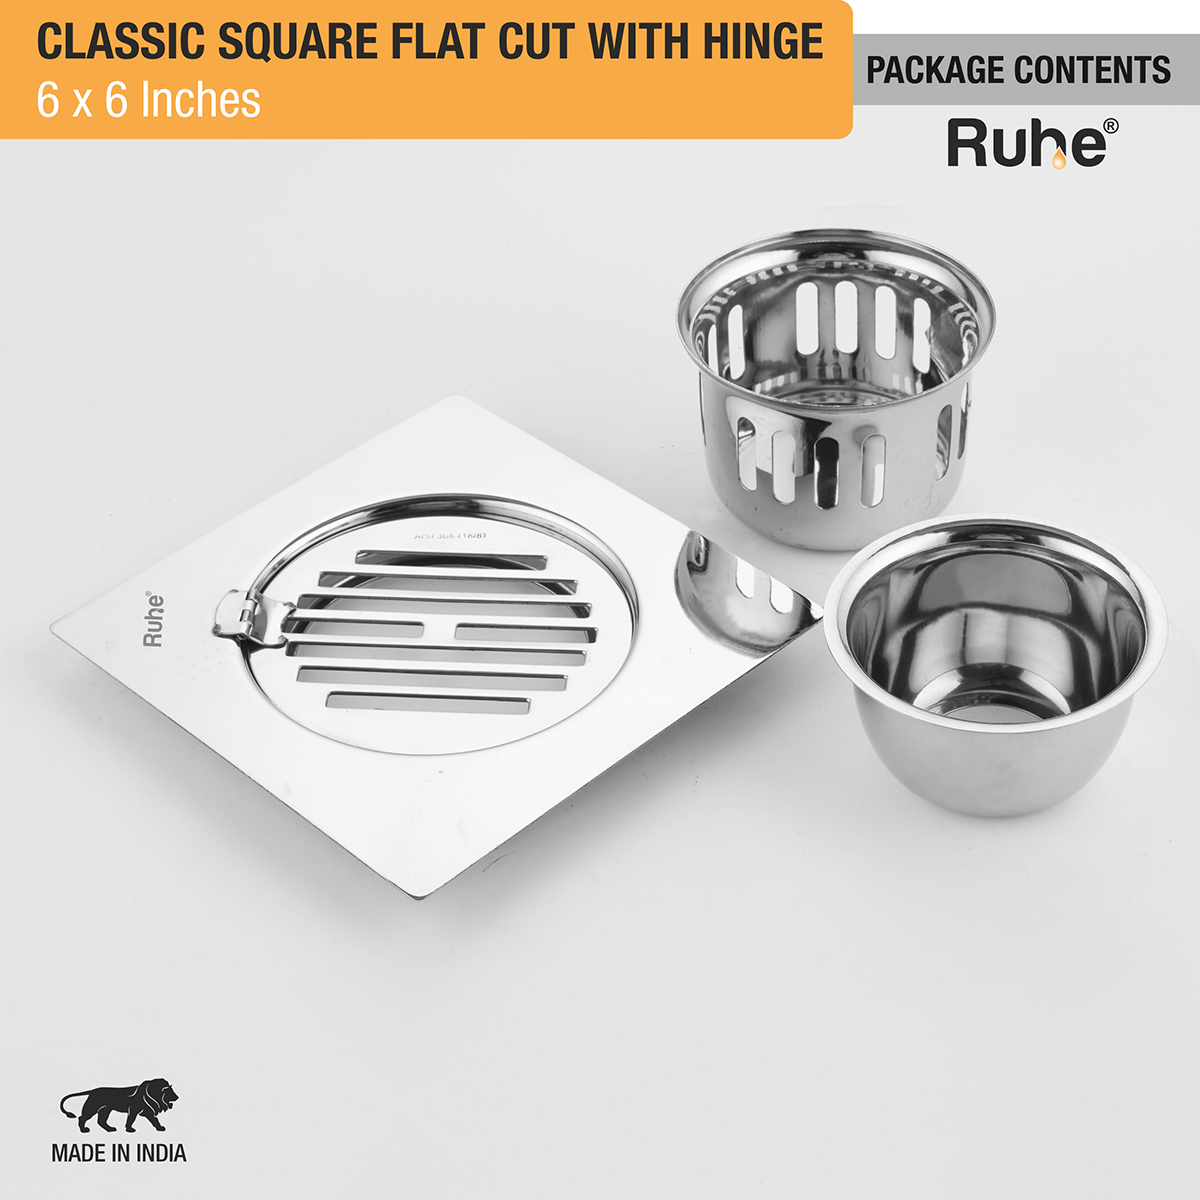 Classic Square Flat Cut Floor Drain (6 x 6 Inches) with Hinge & Cockroach Trap (304 Grade) package content